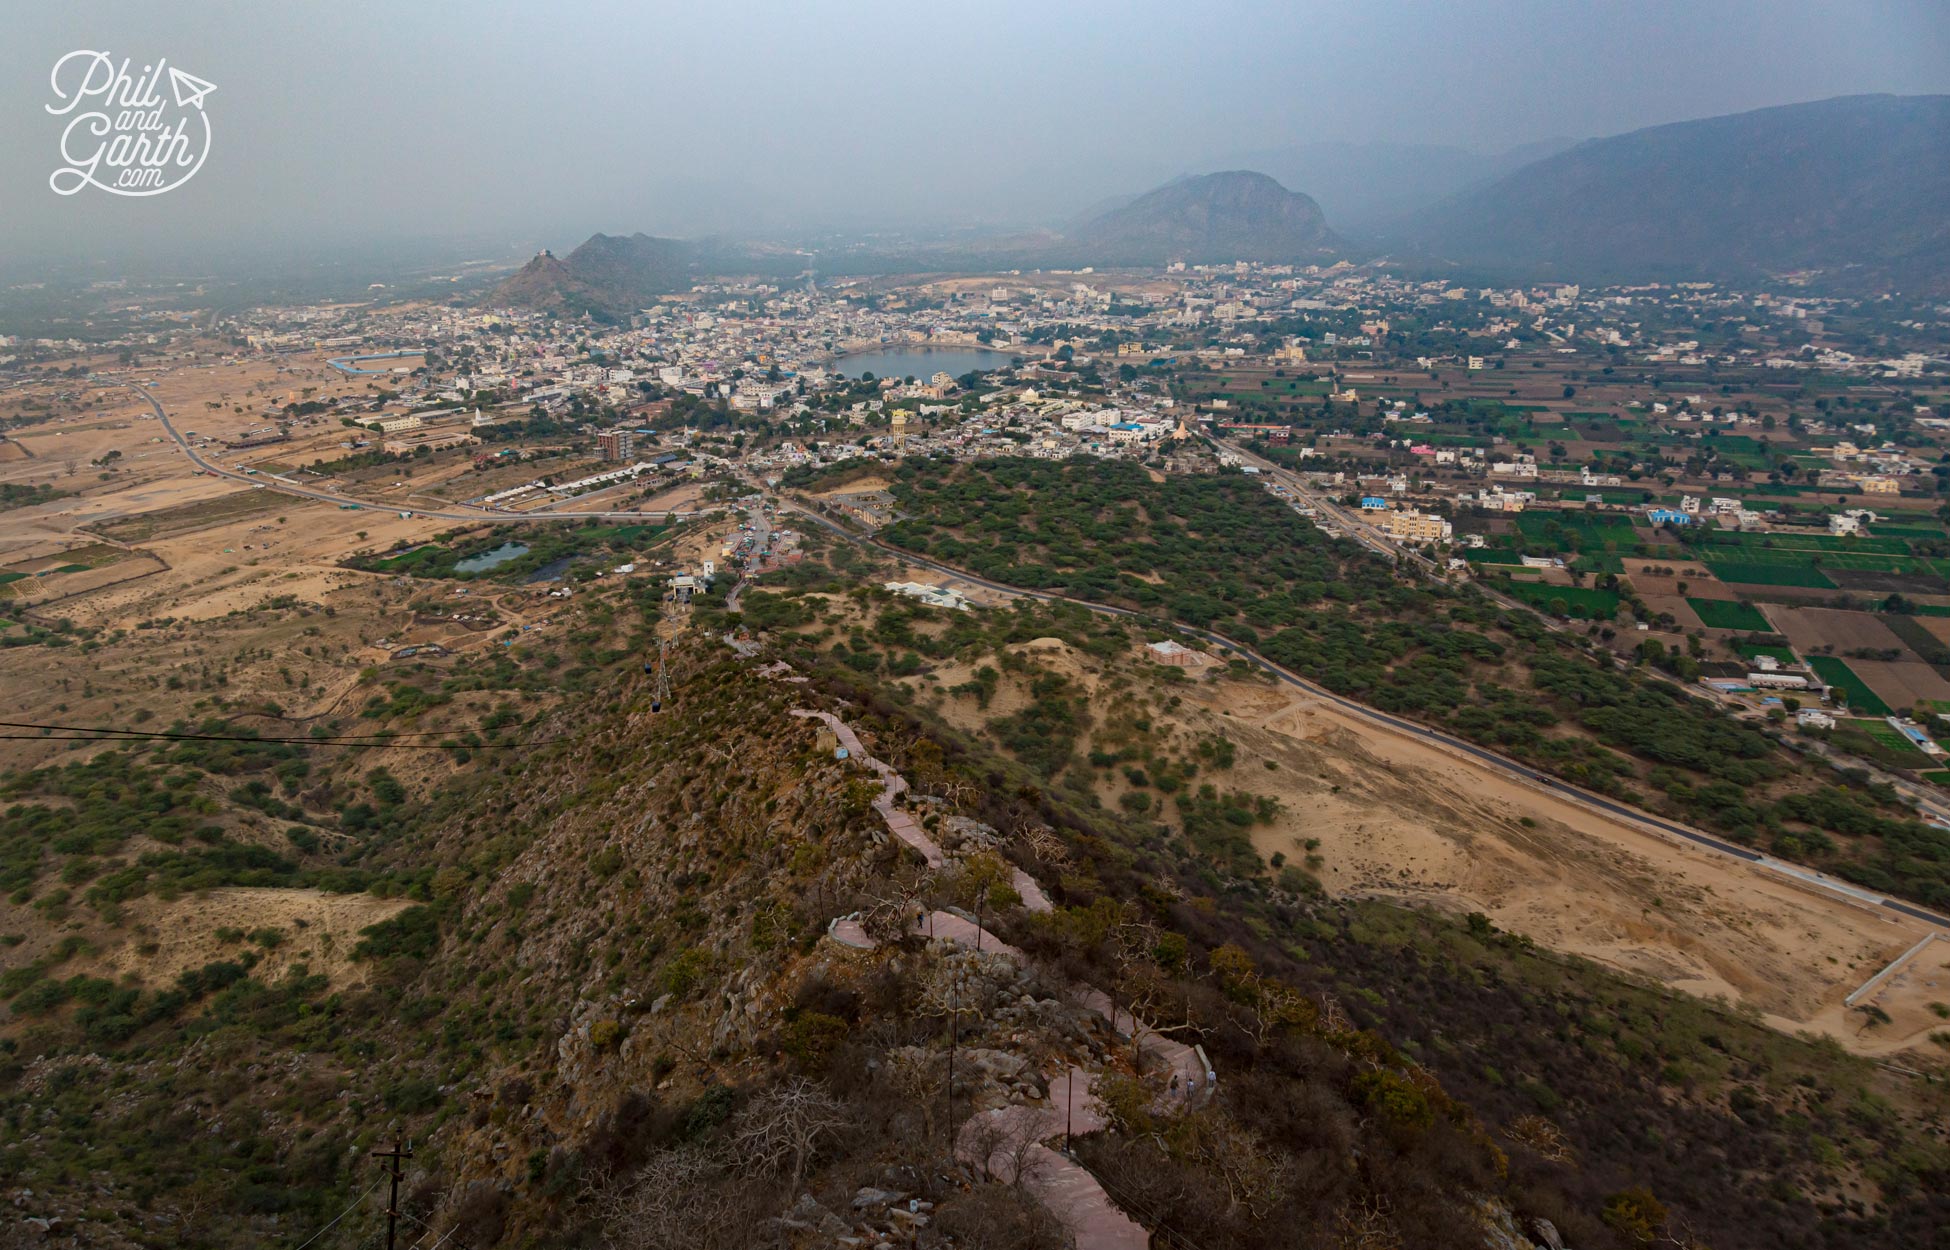 The view of the desert and Pushkar from Savitri Temple